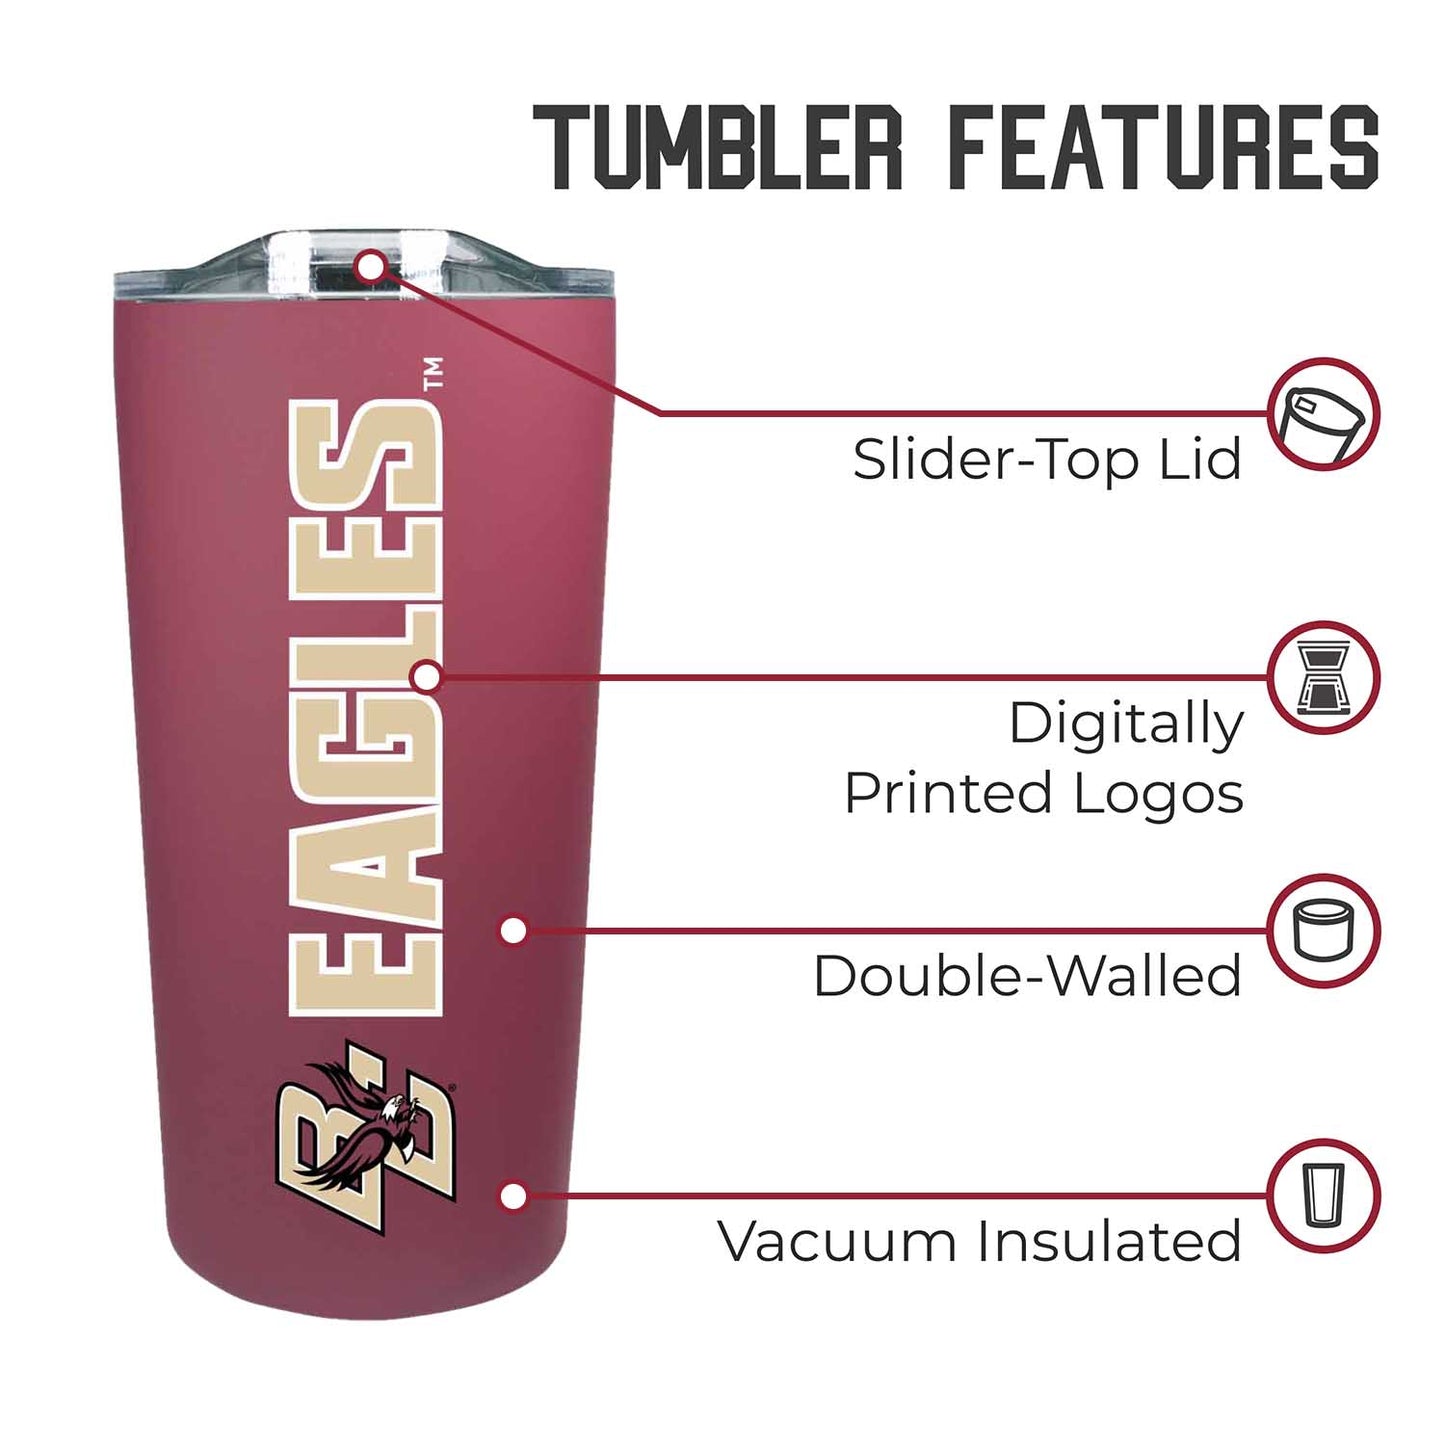 Boston College Eagles NCAA Stainless Steel Tumbler perfect for Gameday - Maroon